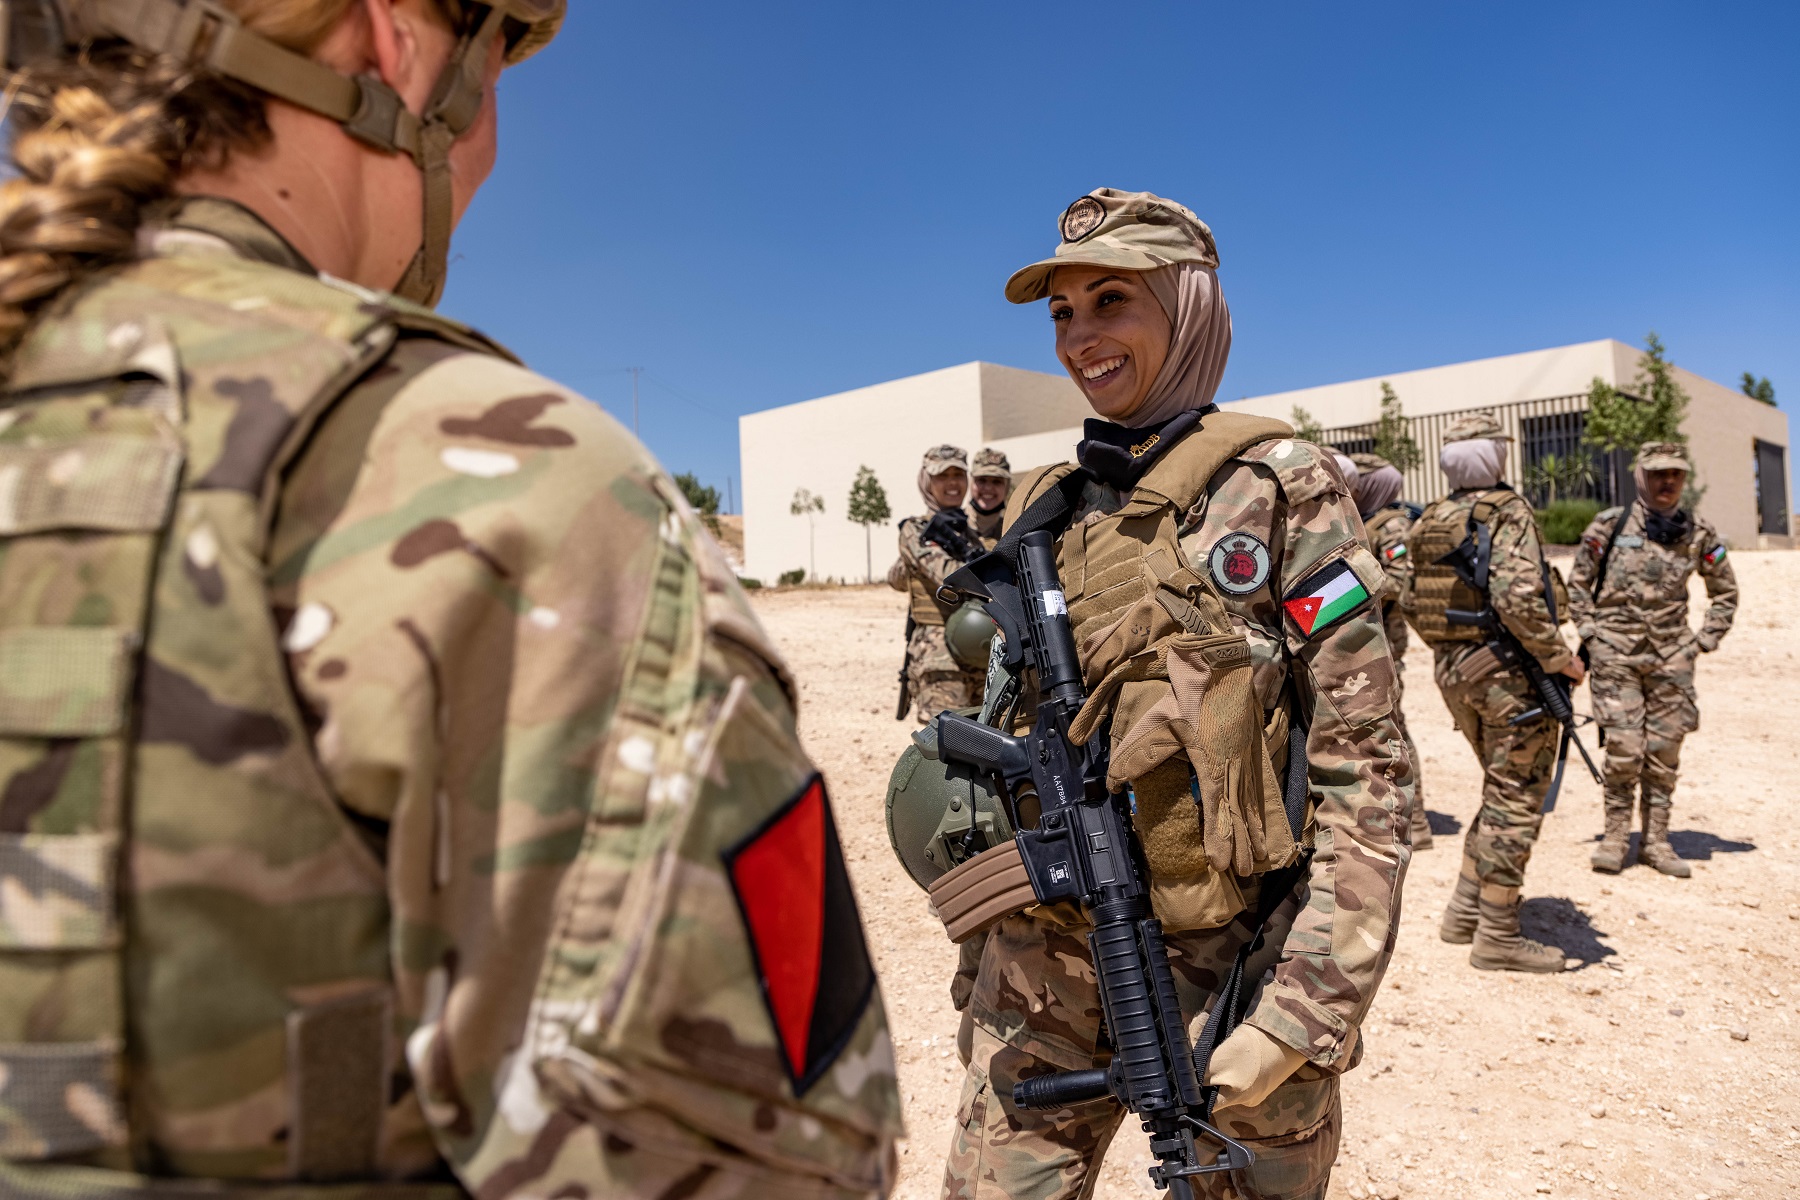 After working with their Jordanian counterparts last week, the British Troops moved south, passing the Dead Sea to link up with their counterparts from the USMC near Aqaba.